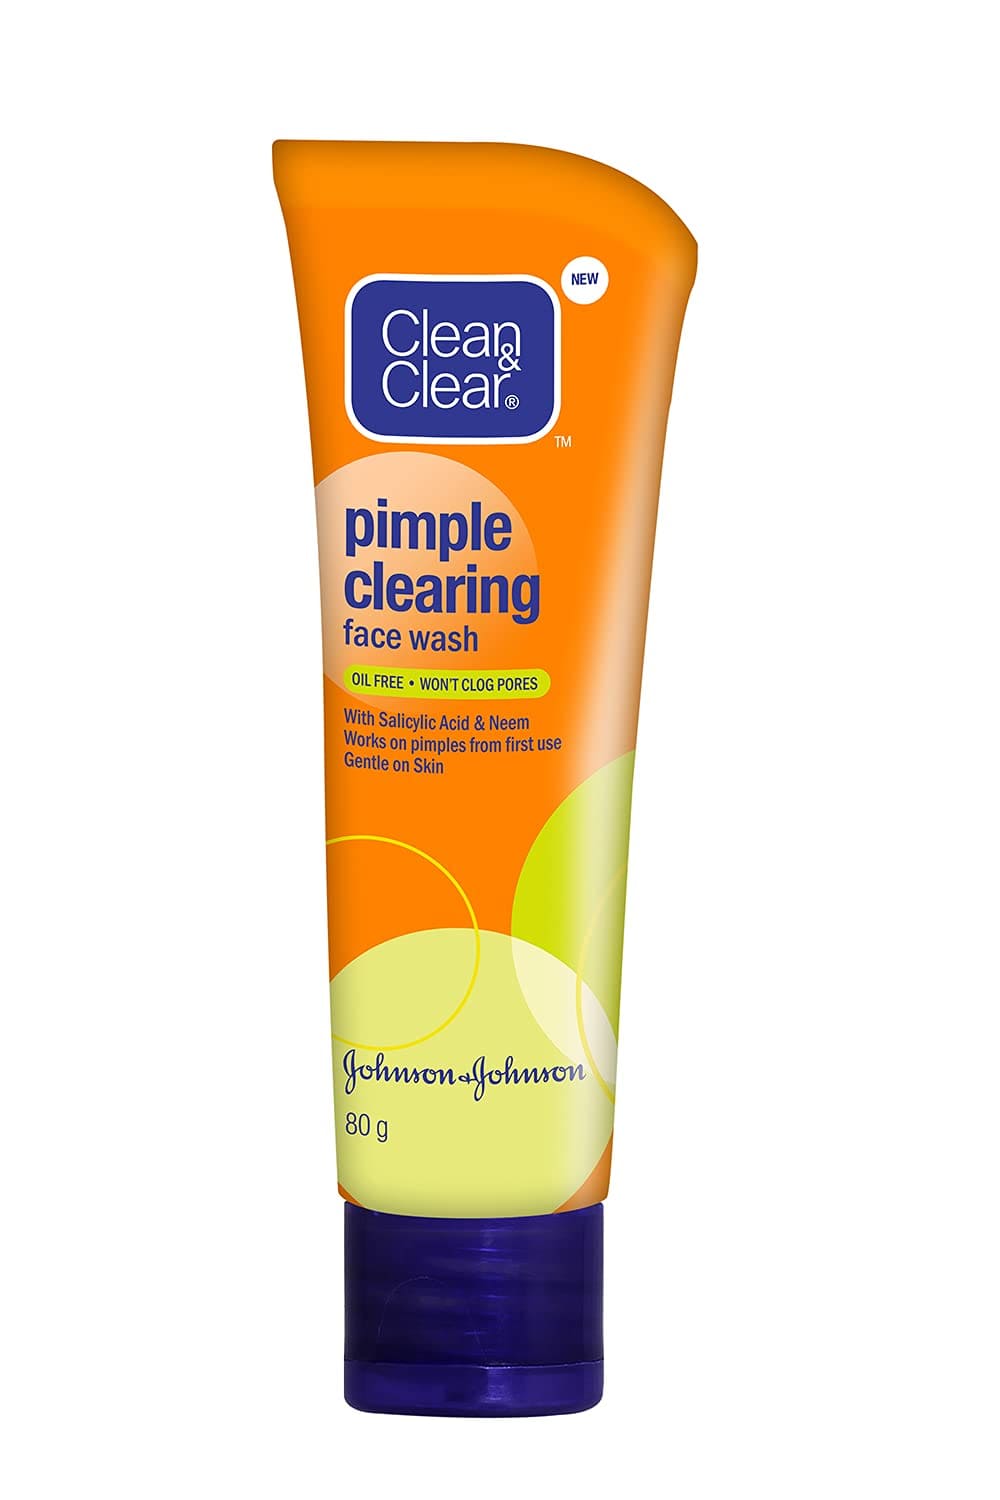 Clean & Clear Pimple Clearing Face Wash, 80G